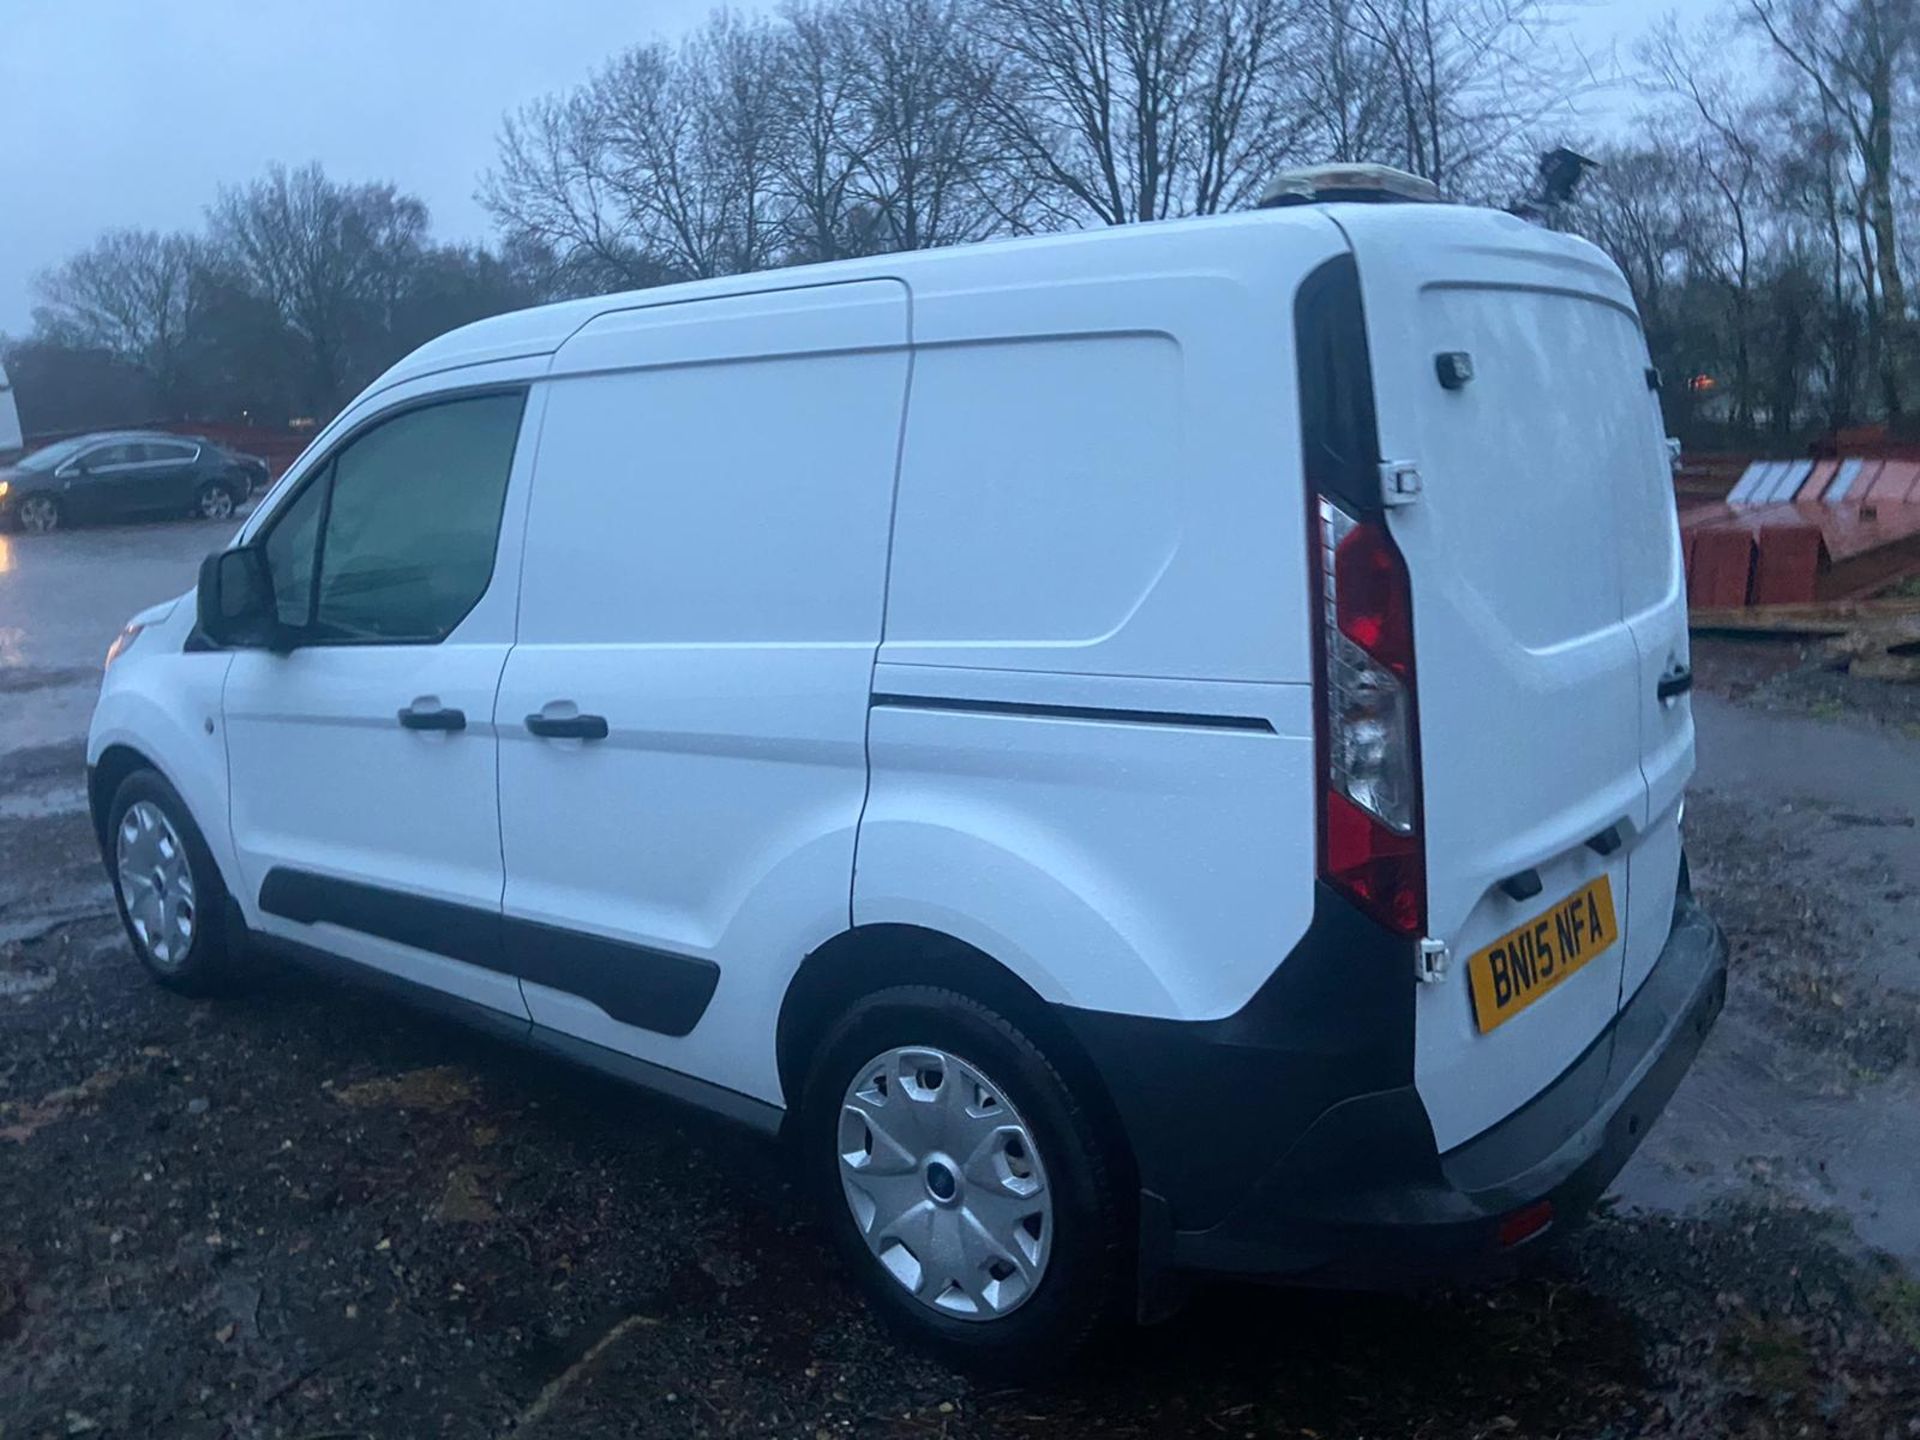 2015/15 REG FORD TRANSIT CONNECT 200 ECONETIC 1.6 DIESEL WHITE PANEL VAN, SHOWING 0 FORMER KEEPERS - Image 4 of 9